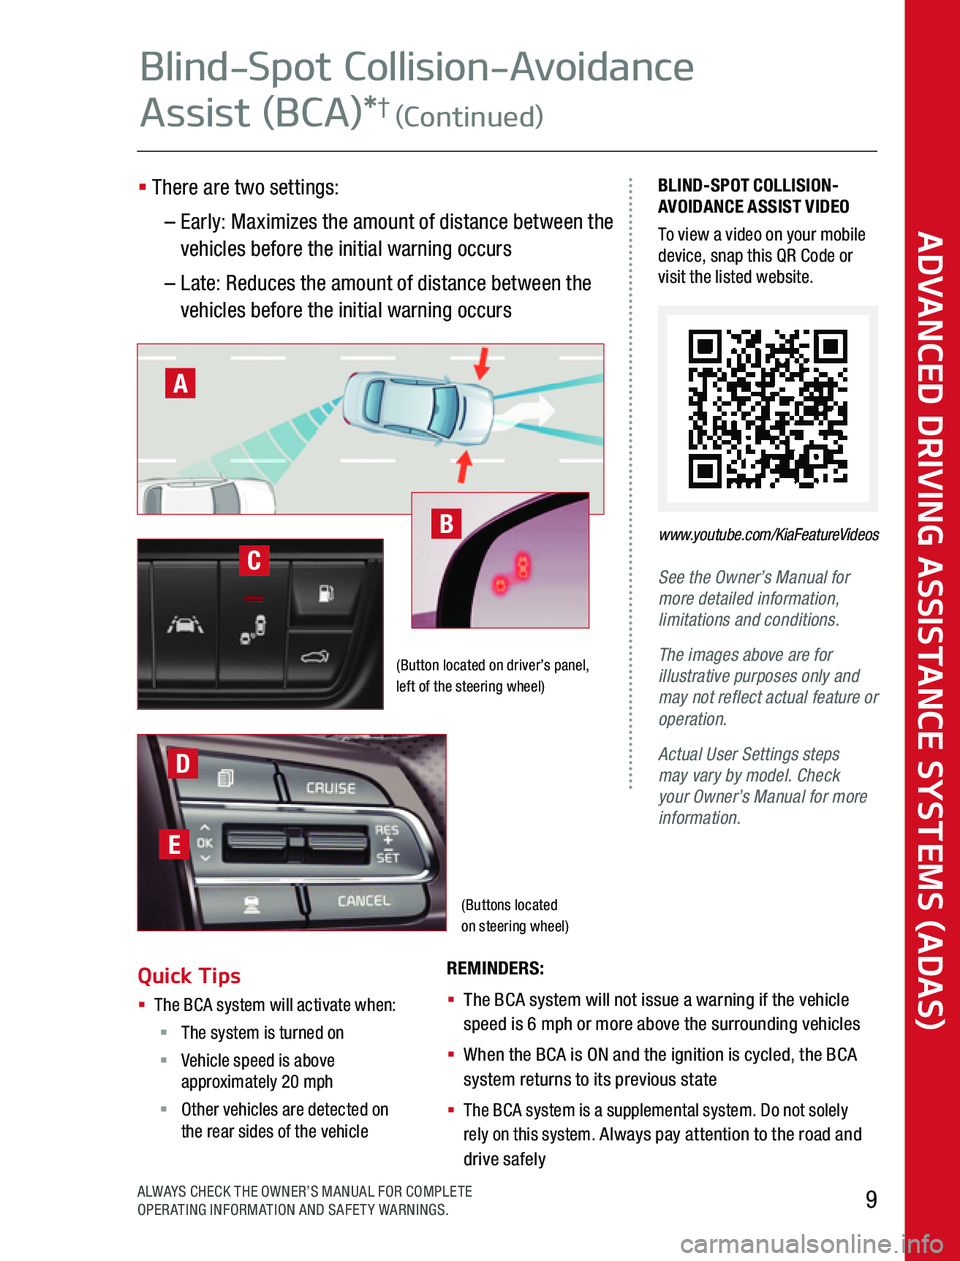 KIA TELLURIDE 2020  Advanced Driving Assistance System (Buttons located  on steering wheel)
BLIND-SPOT COLLISION-AVOIDANCE ASSIST VIDEOTo view a video on your mobile device, snap this QR Code or visit the listed website  
See the Owner’s Manual for more